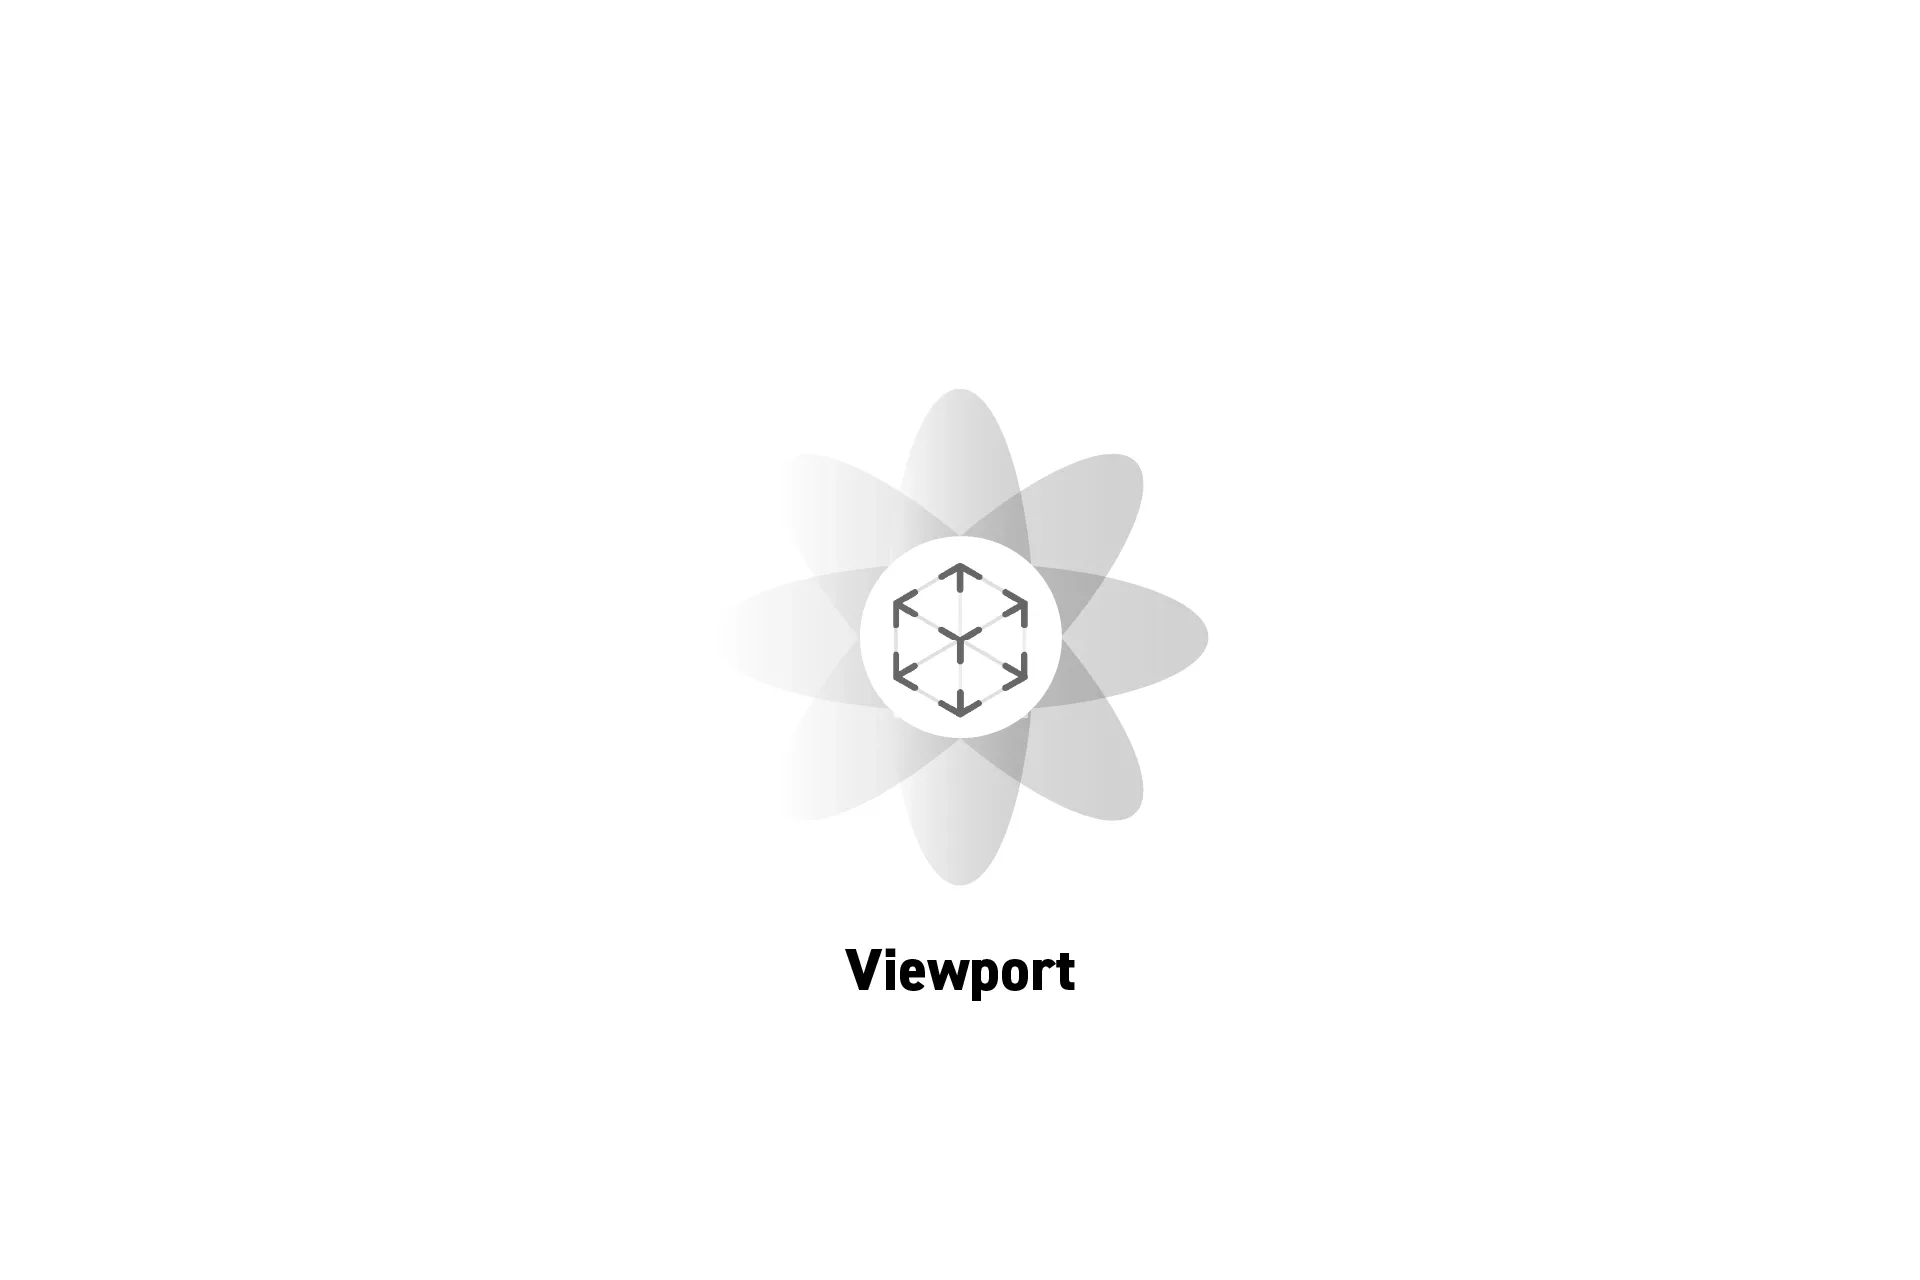 A flower that represents spatial computing with the text "Viewport" beneath it.